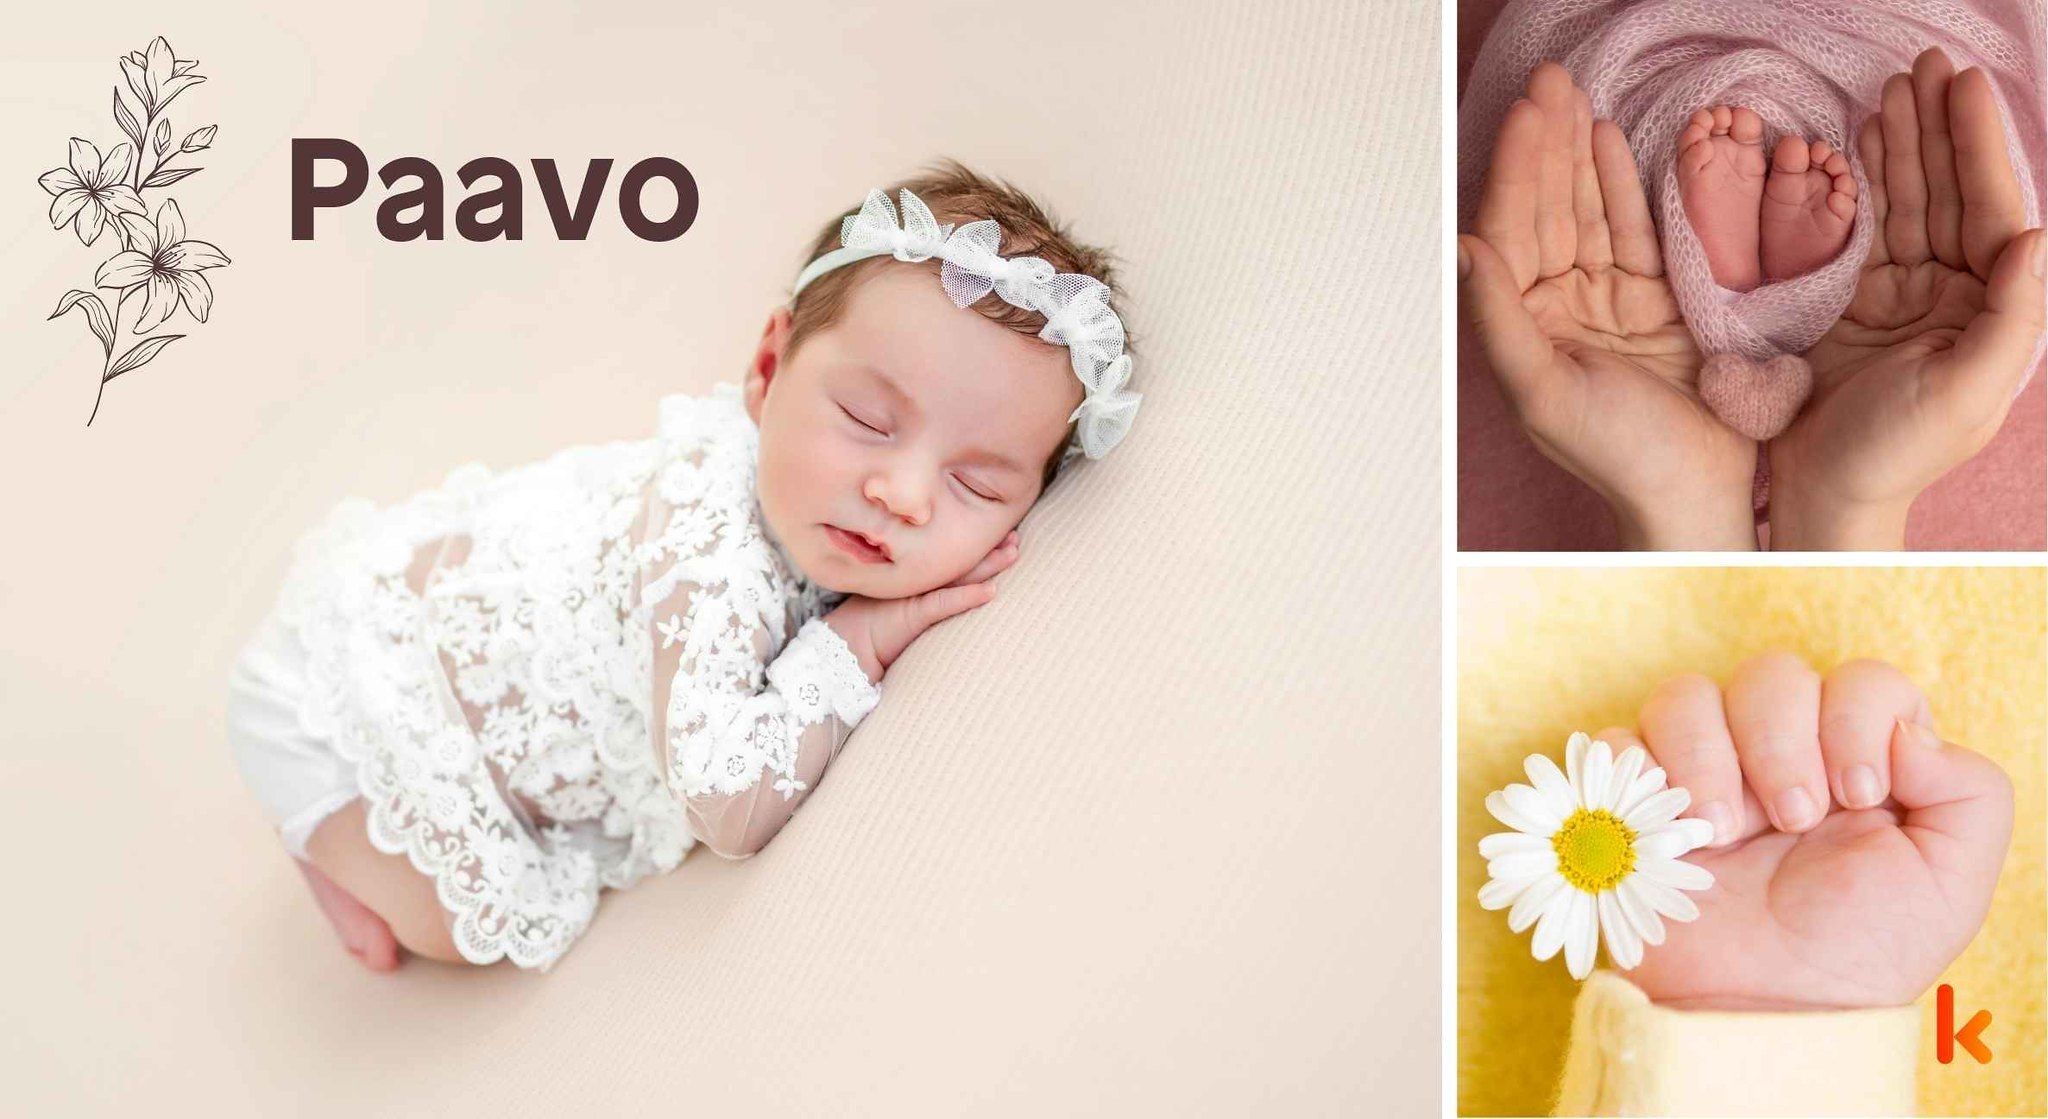 Meaning of the name Paavo